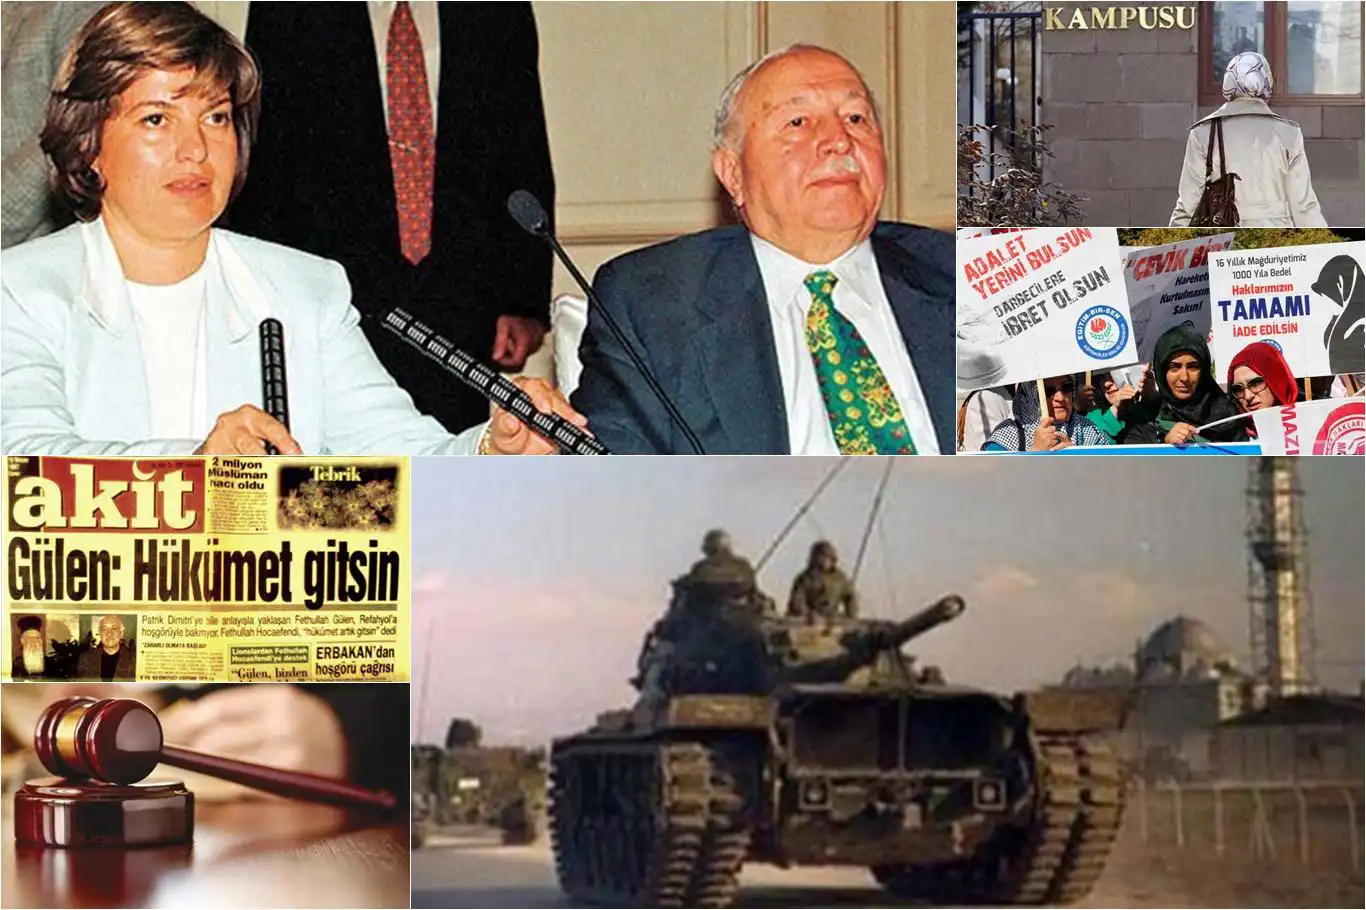 27th anniversary of Türkiye's post-modern coup: A look back at February 28, 1997